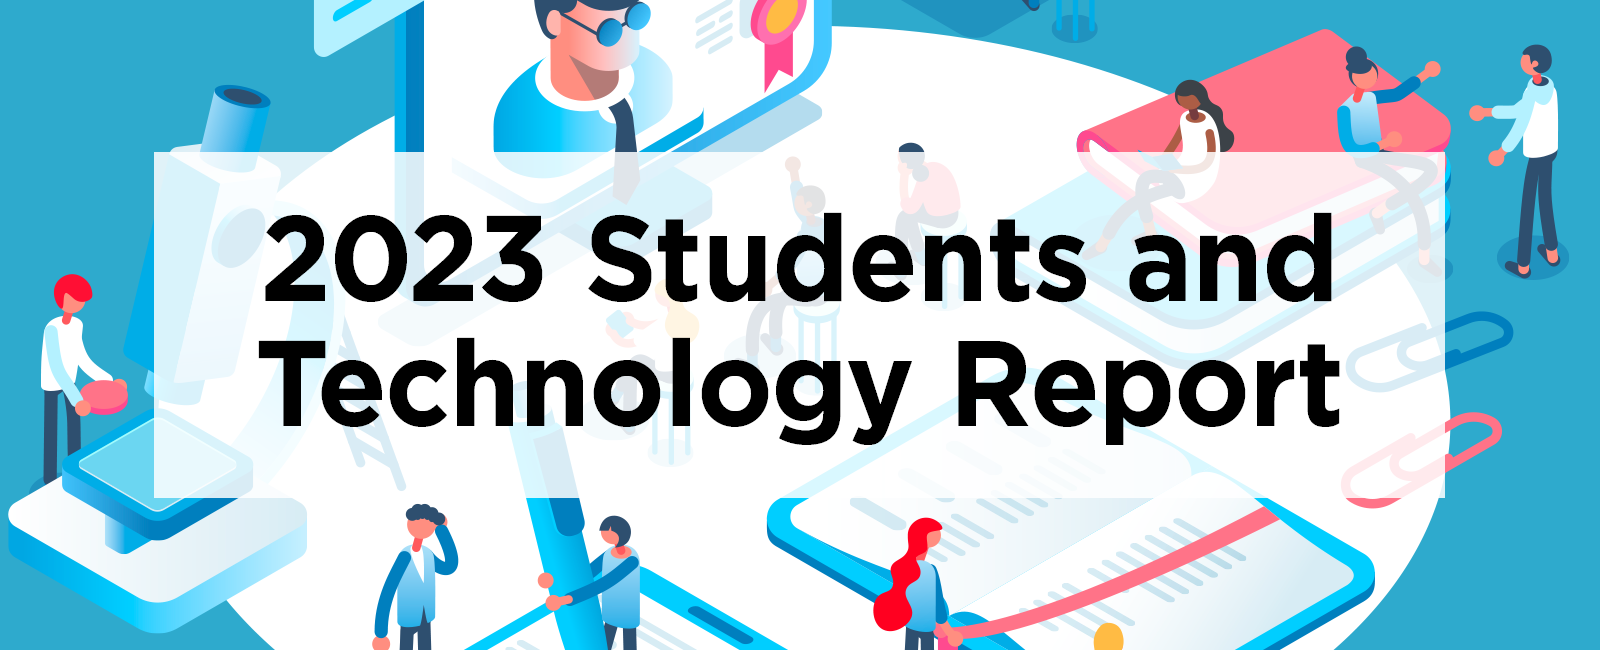 2023 Students and Technology Report: Flexibility, Choice, and Equity in the Student Experience